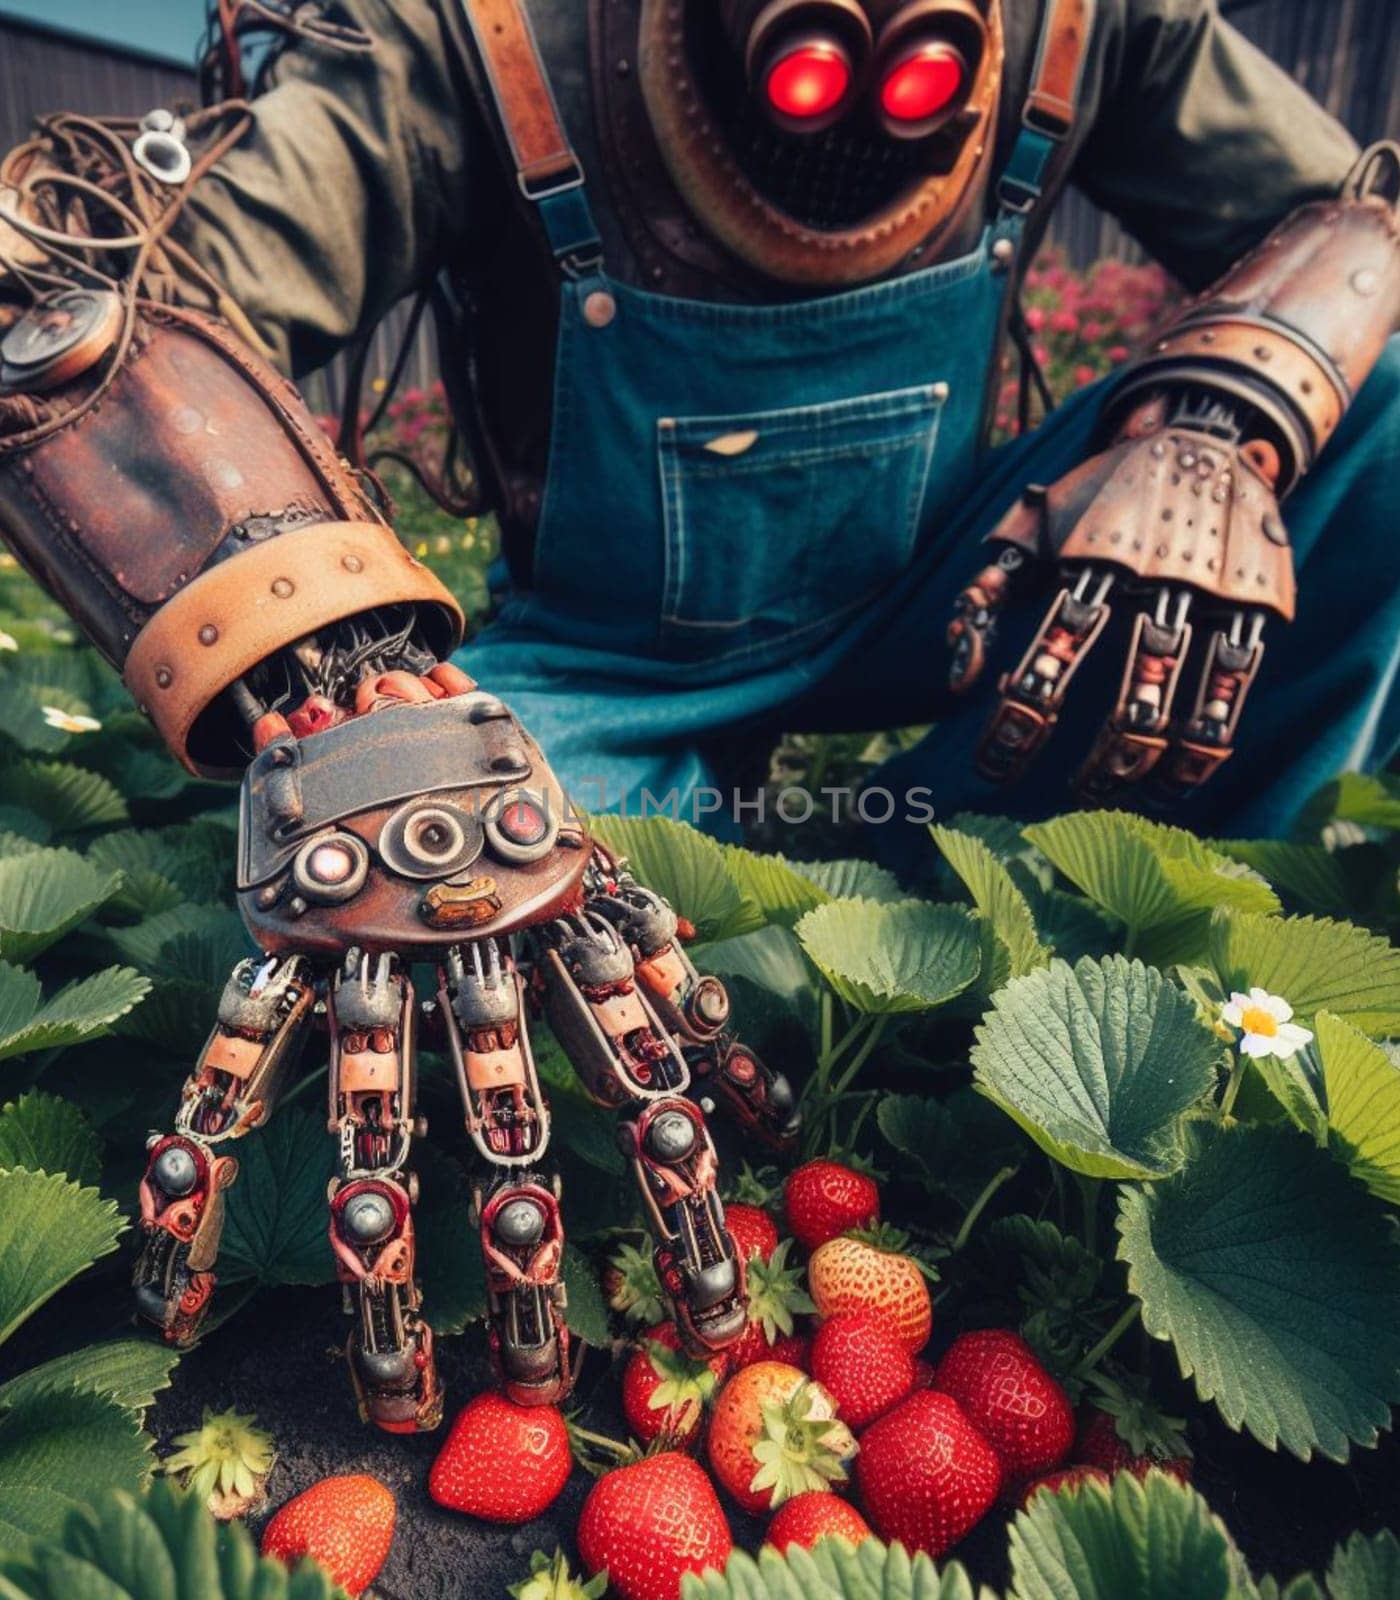 robot working in farm vegetable garden to grow produce for human consumption by verbano